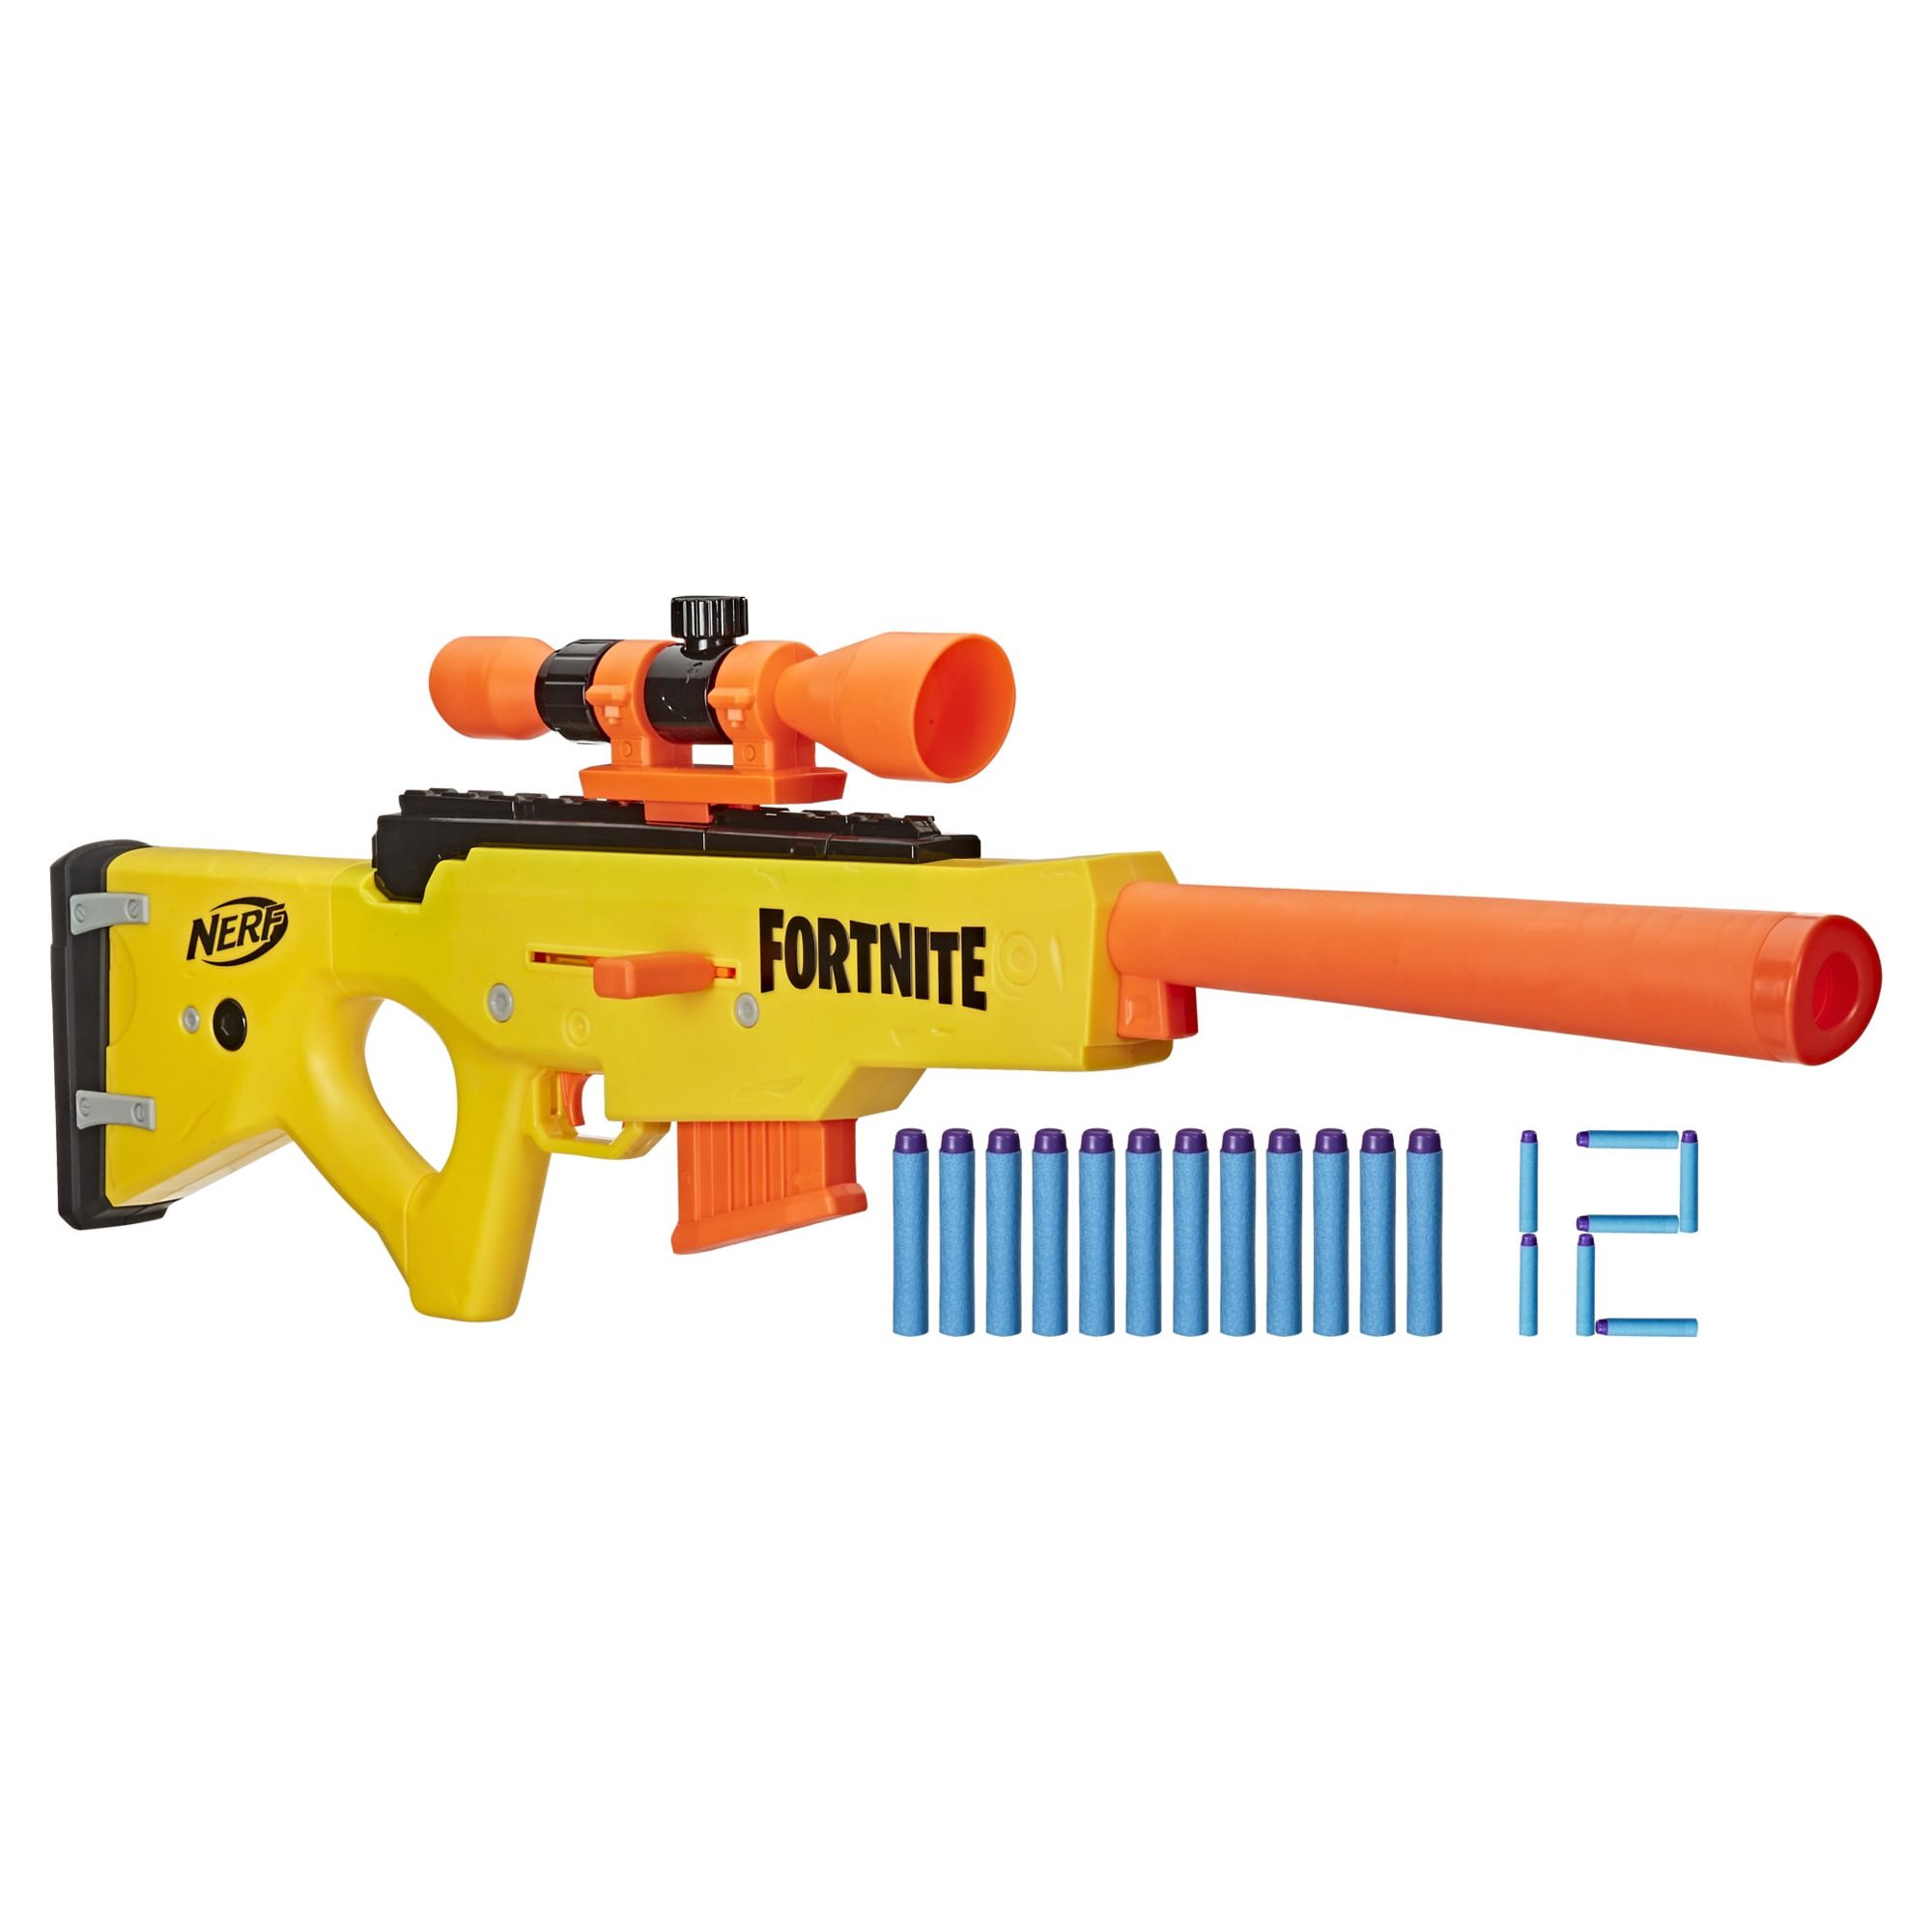 Nerf Fortnite BASR-L Blaster, Includes 12 Official Darts, Kids Toy for Boys and Girls for Ages 8+ - image 1 of 6